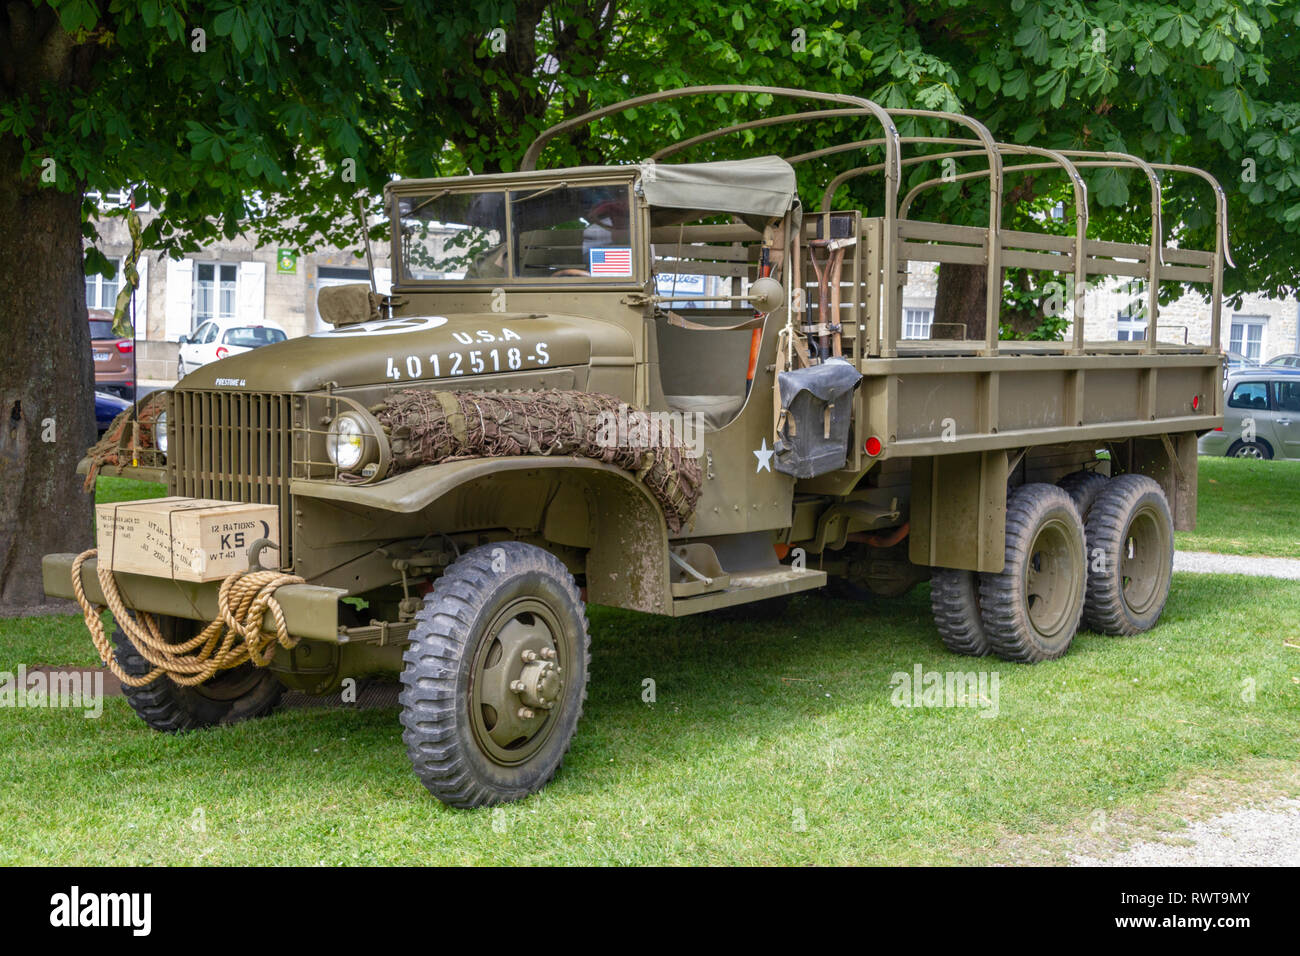 World War 2 U.S Army GMC CCKW 2½-ton 6x6 truck in Sainte-Marie-du-Mont, Normandy, Manche, France, in June 2014. Stock Photo